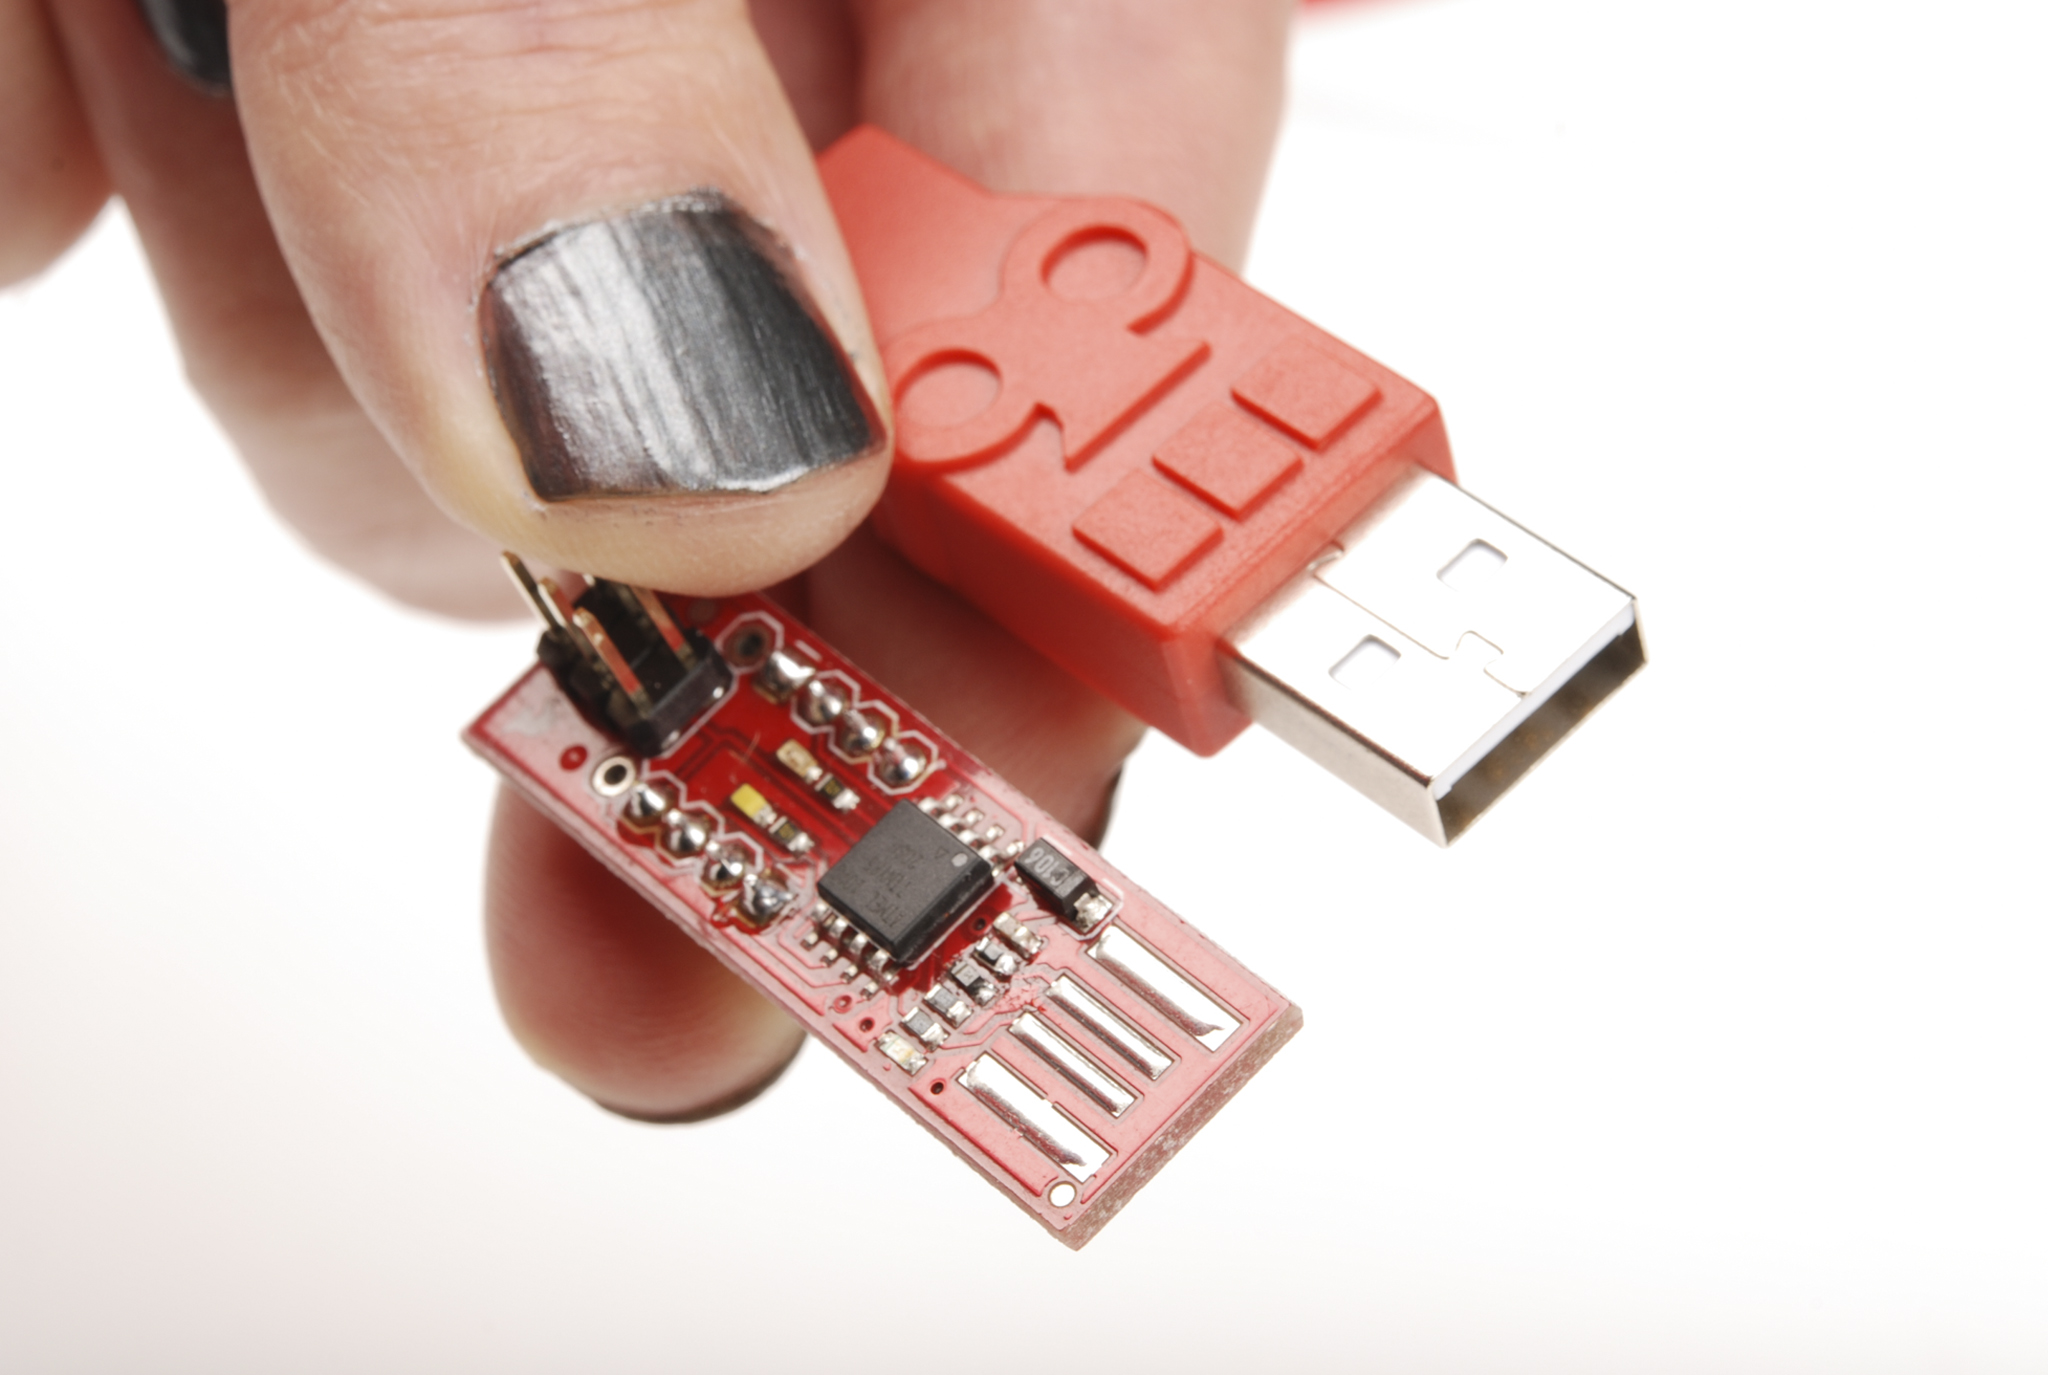 What's Inside: USB Flash Drive Components